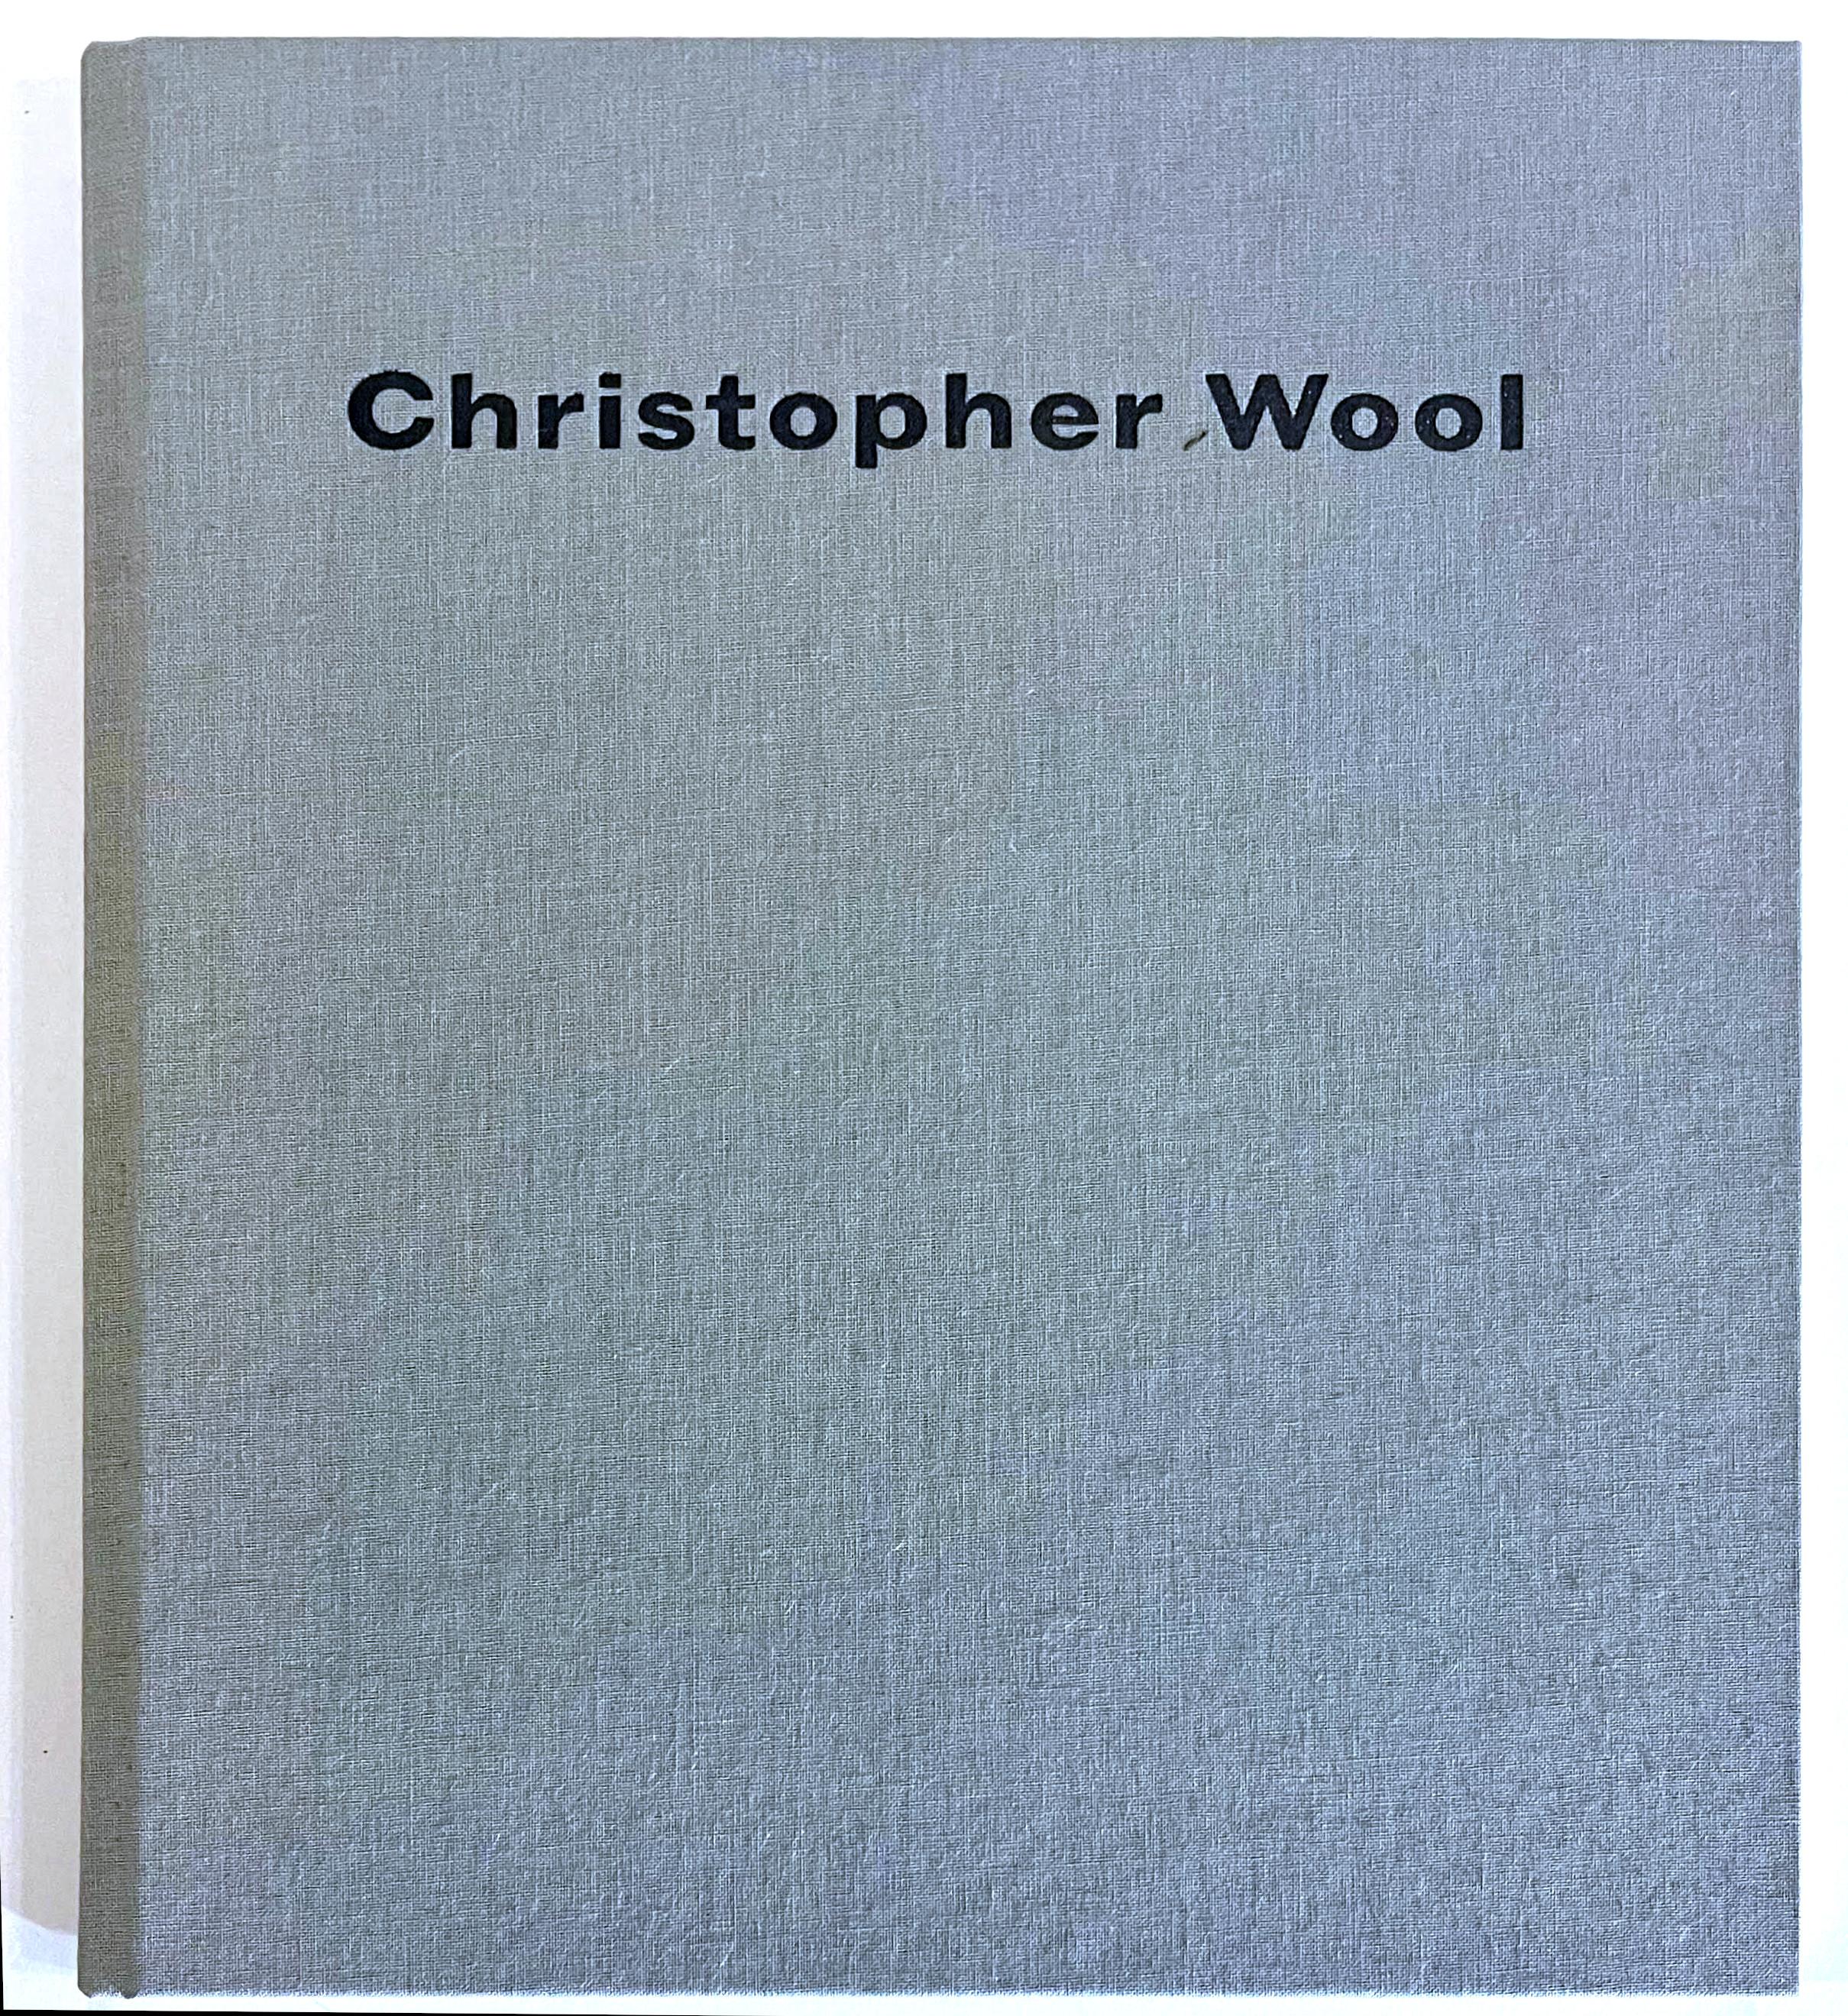 Gagosian Gallery hardback monograph (hand signed by Christopher Wool) For Sale 1